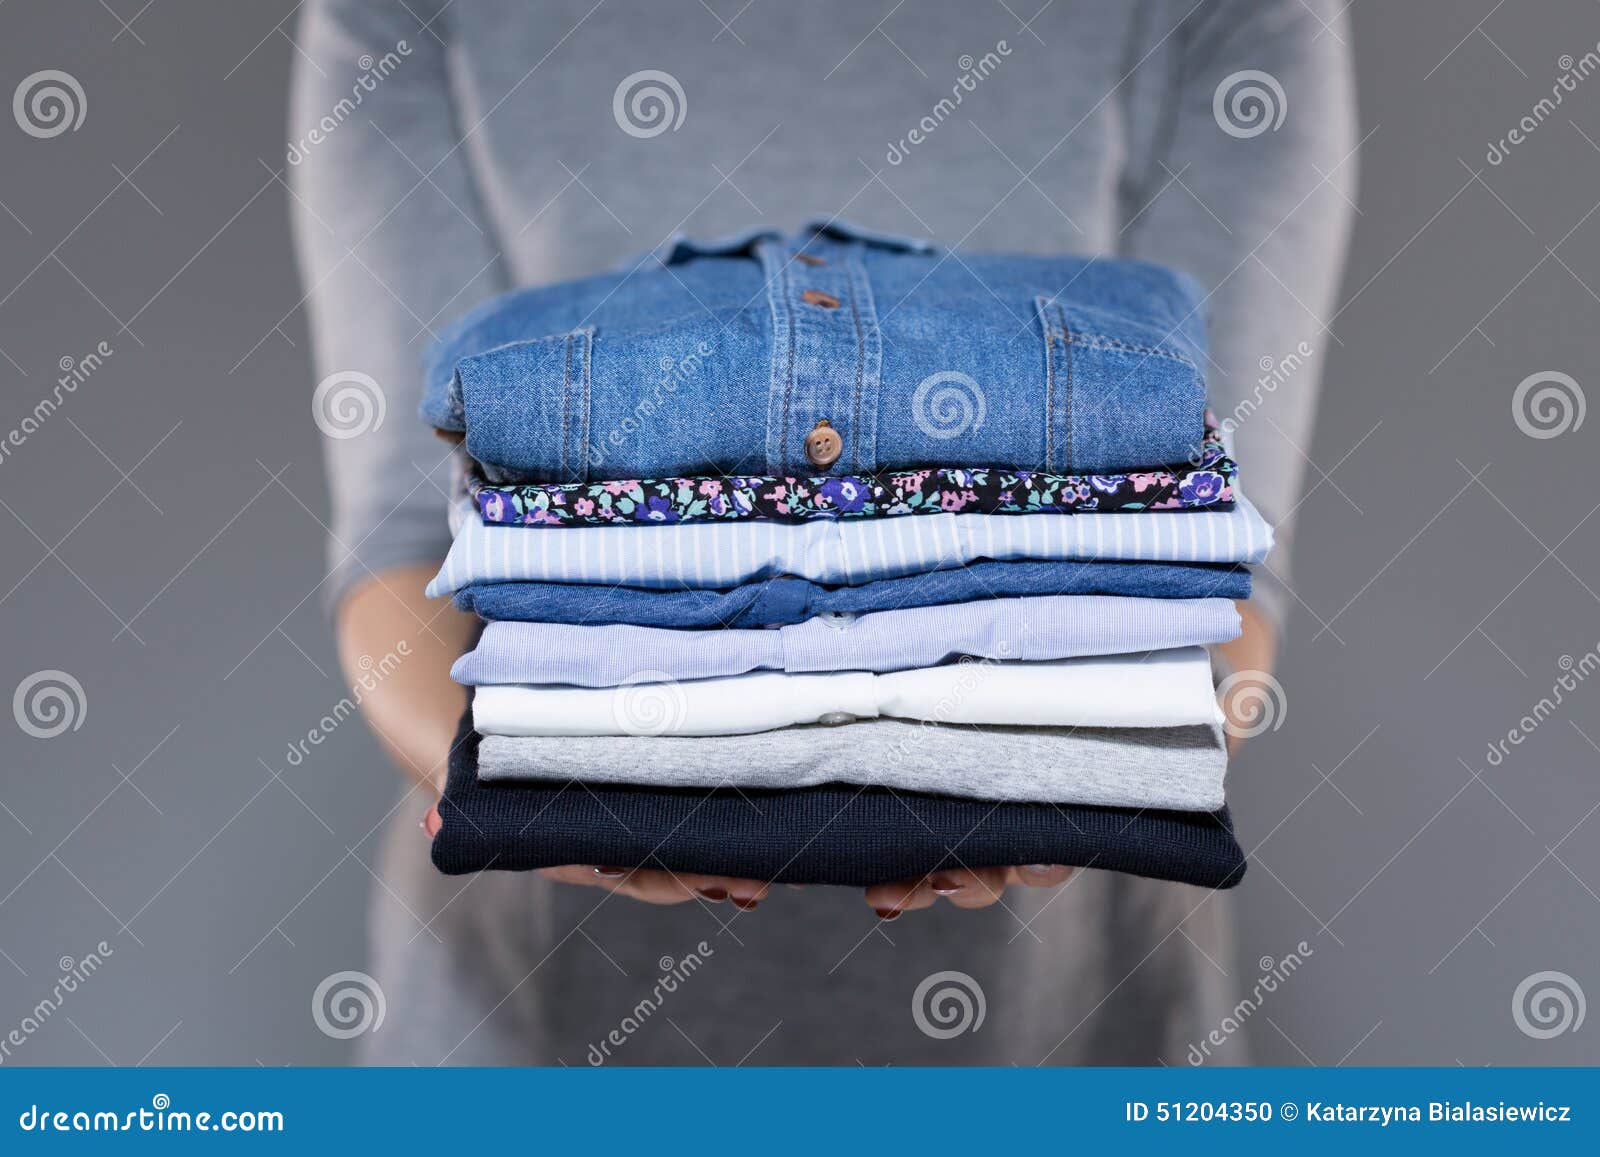 woman holding clothes in hands